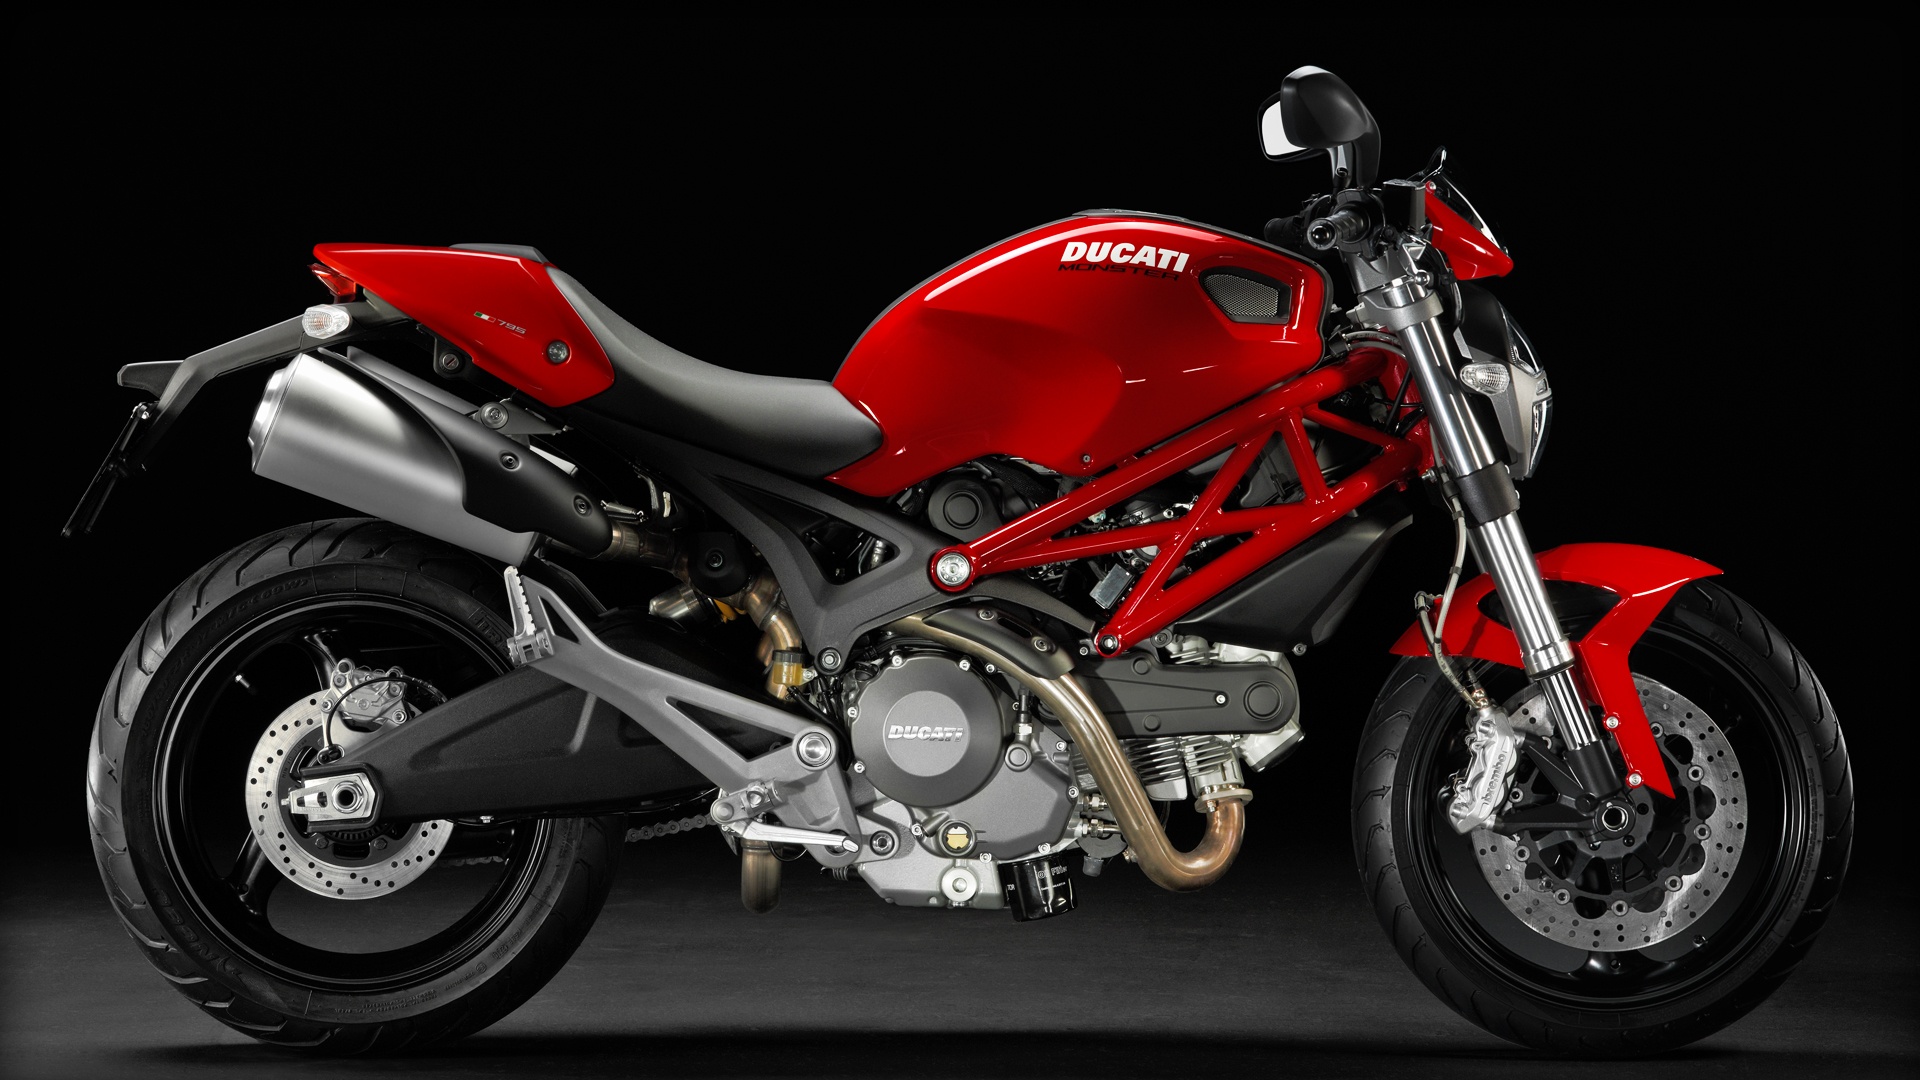 DUCATI MONSTER 795 ABS PARTS